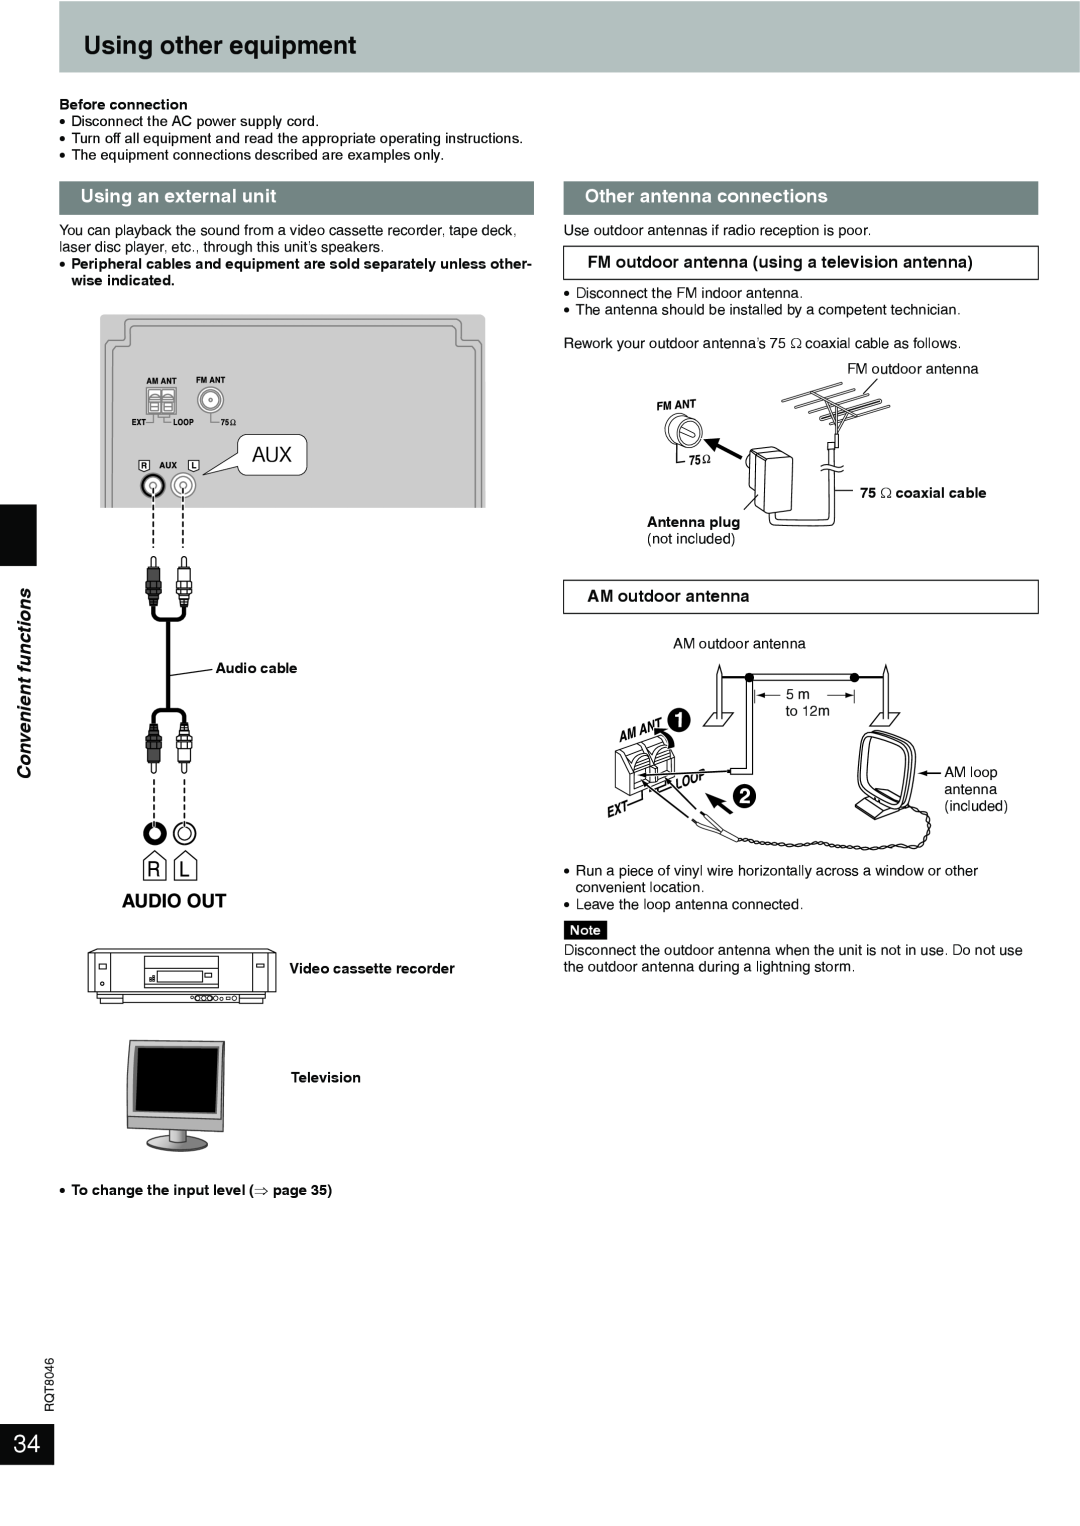 Panasonic SC-PM71SD manual Using other equipment, Using an external unit, Other antenna connections, functions, Convenient 